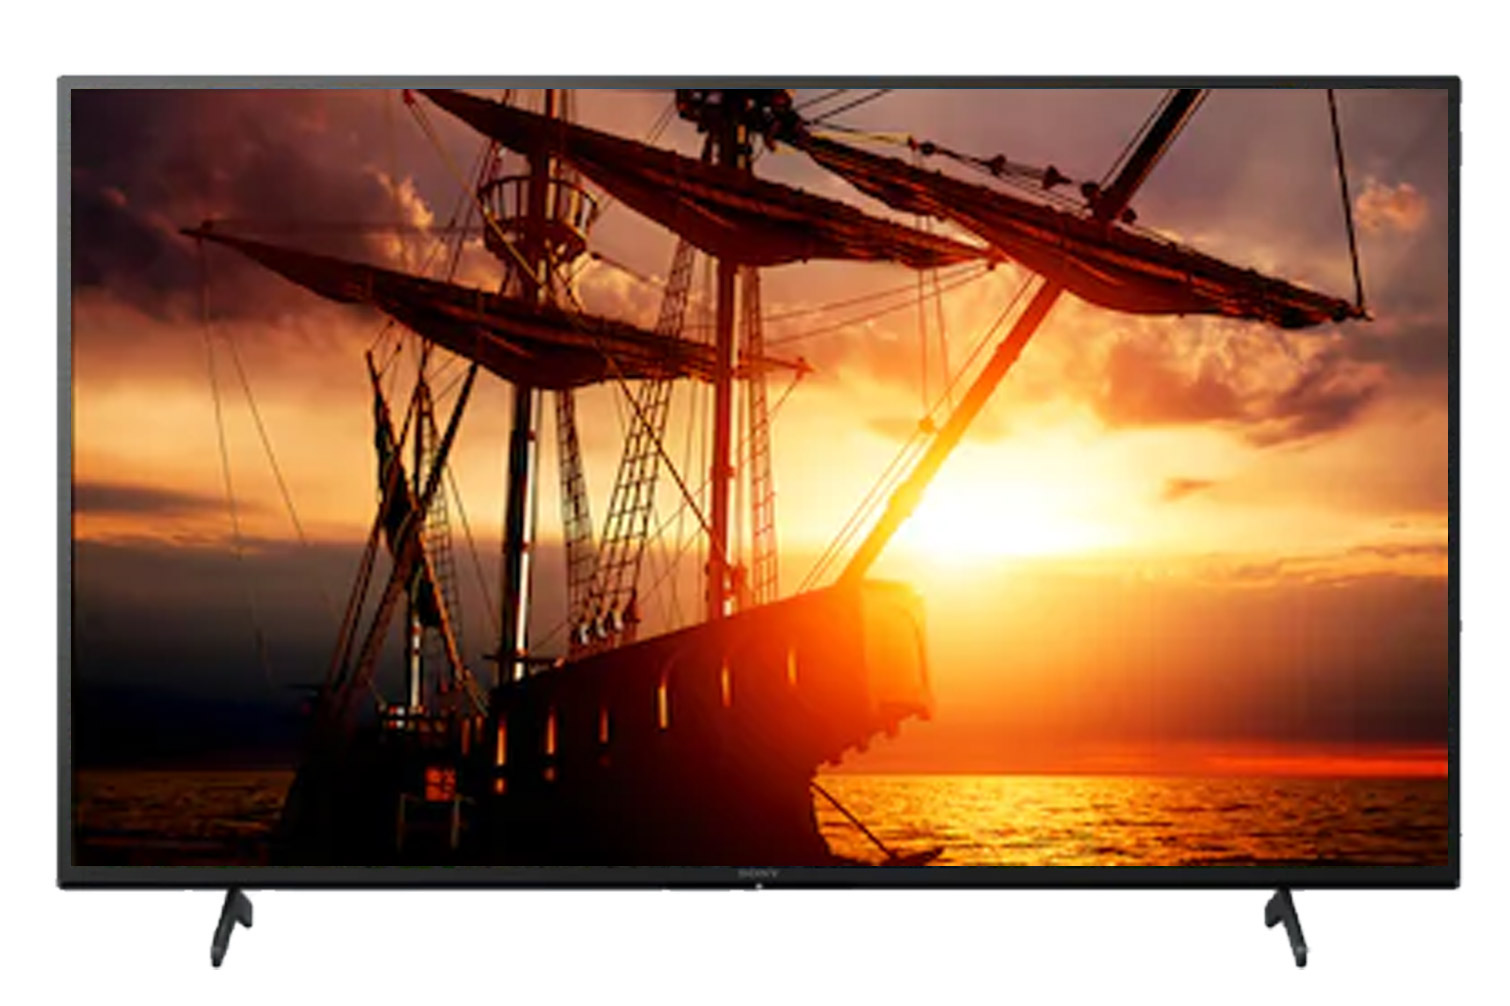  Smart Tivi 4K Sony KD-43X75 43 inch 4K HDR Android TV Mới 2021